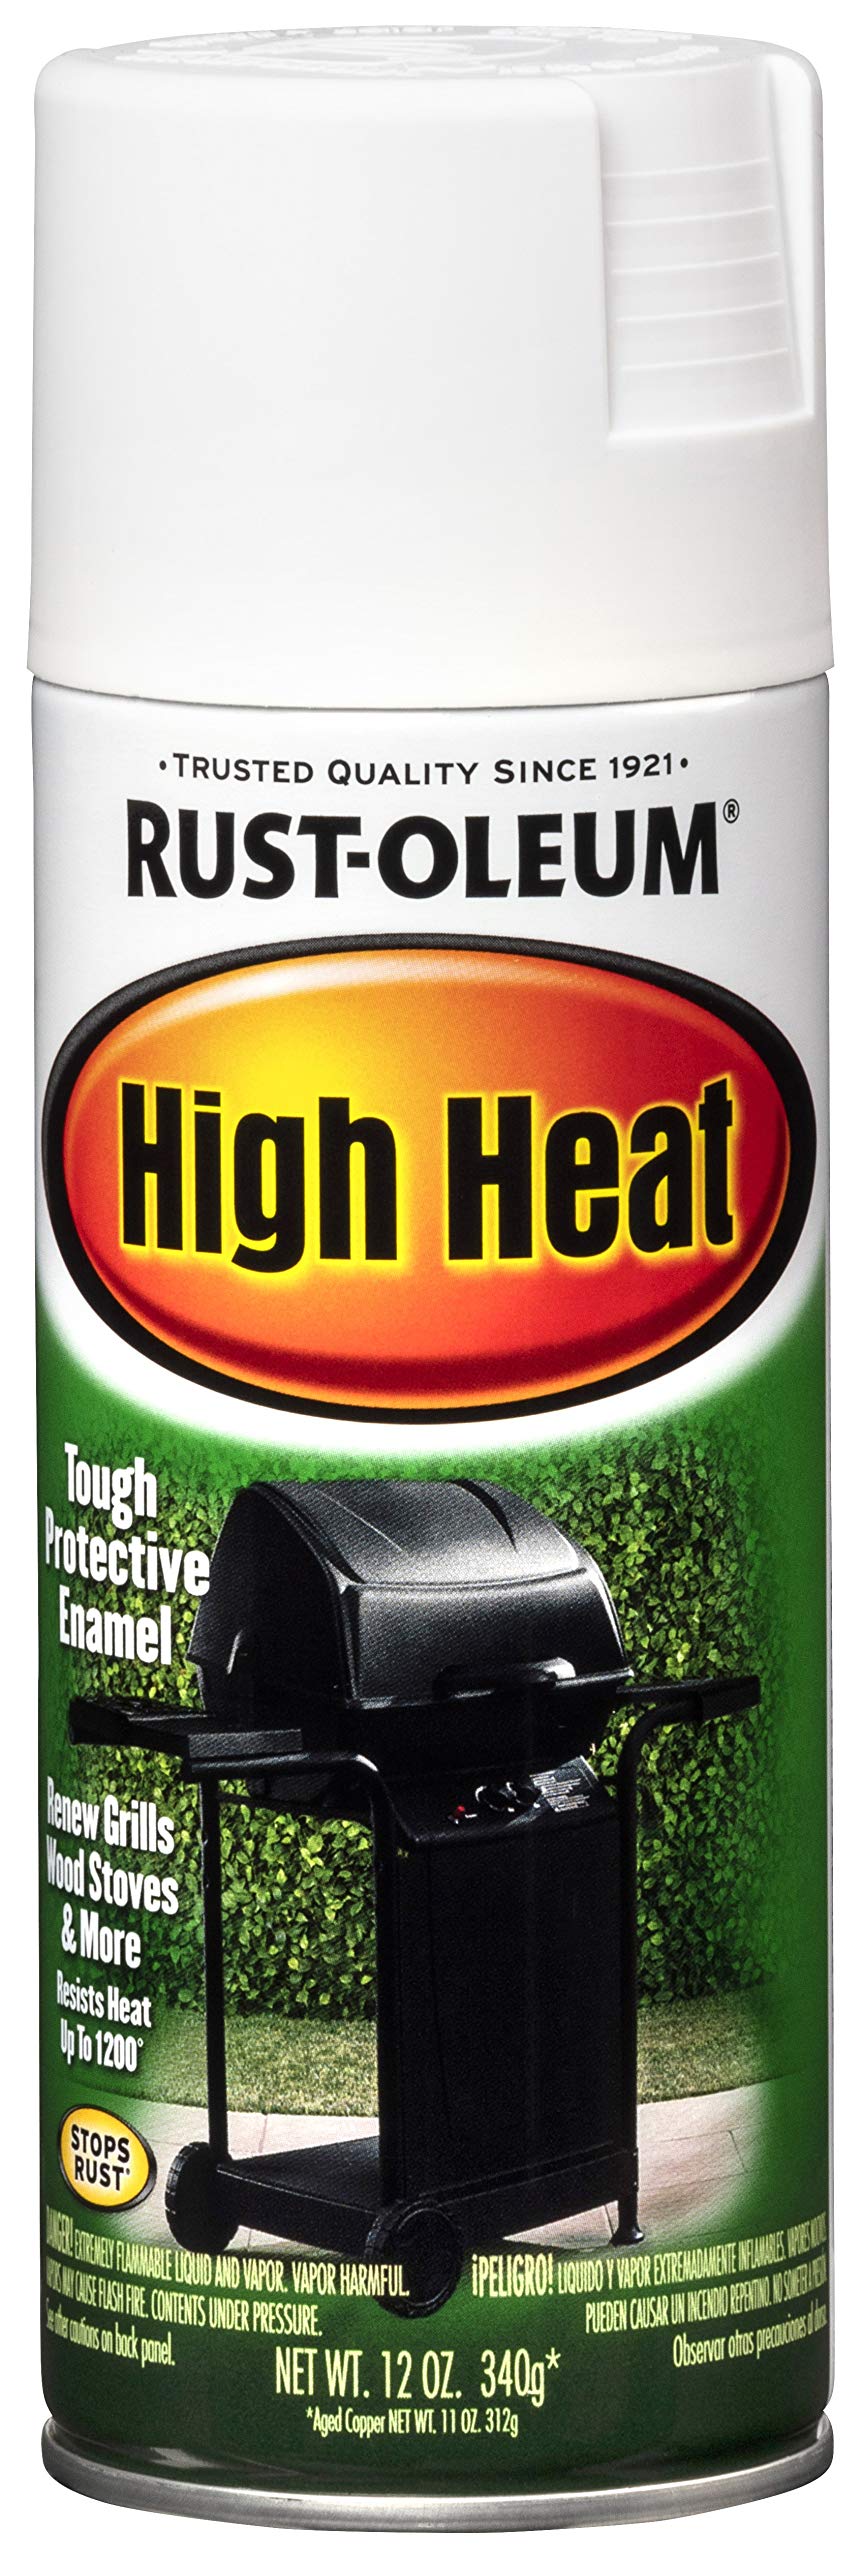 12-Oz Rust-Oleum High Heat Spray Paint (White) $3.88 + Free Shipping w/ Prime or Orders $25+